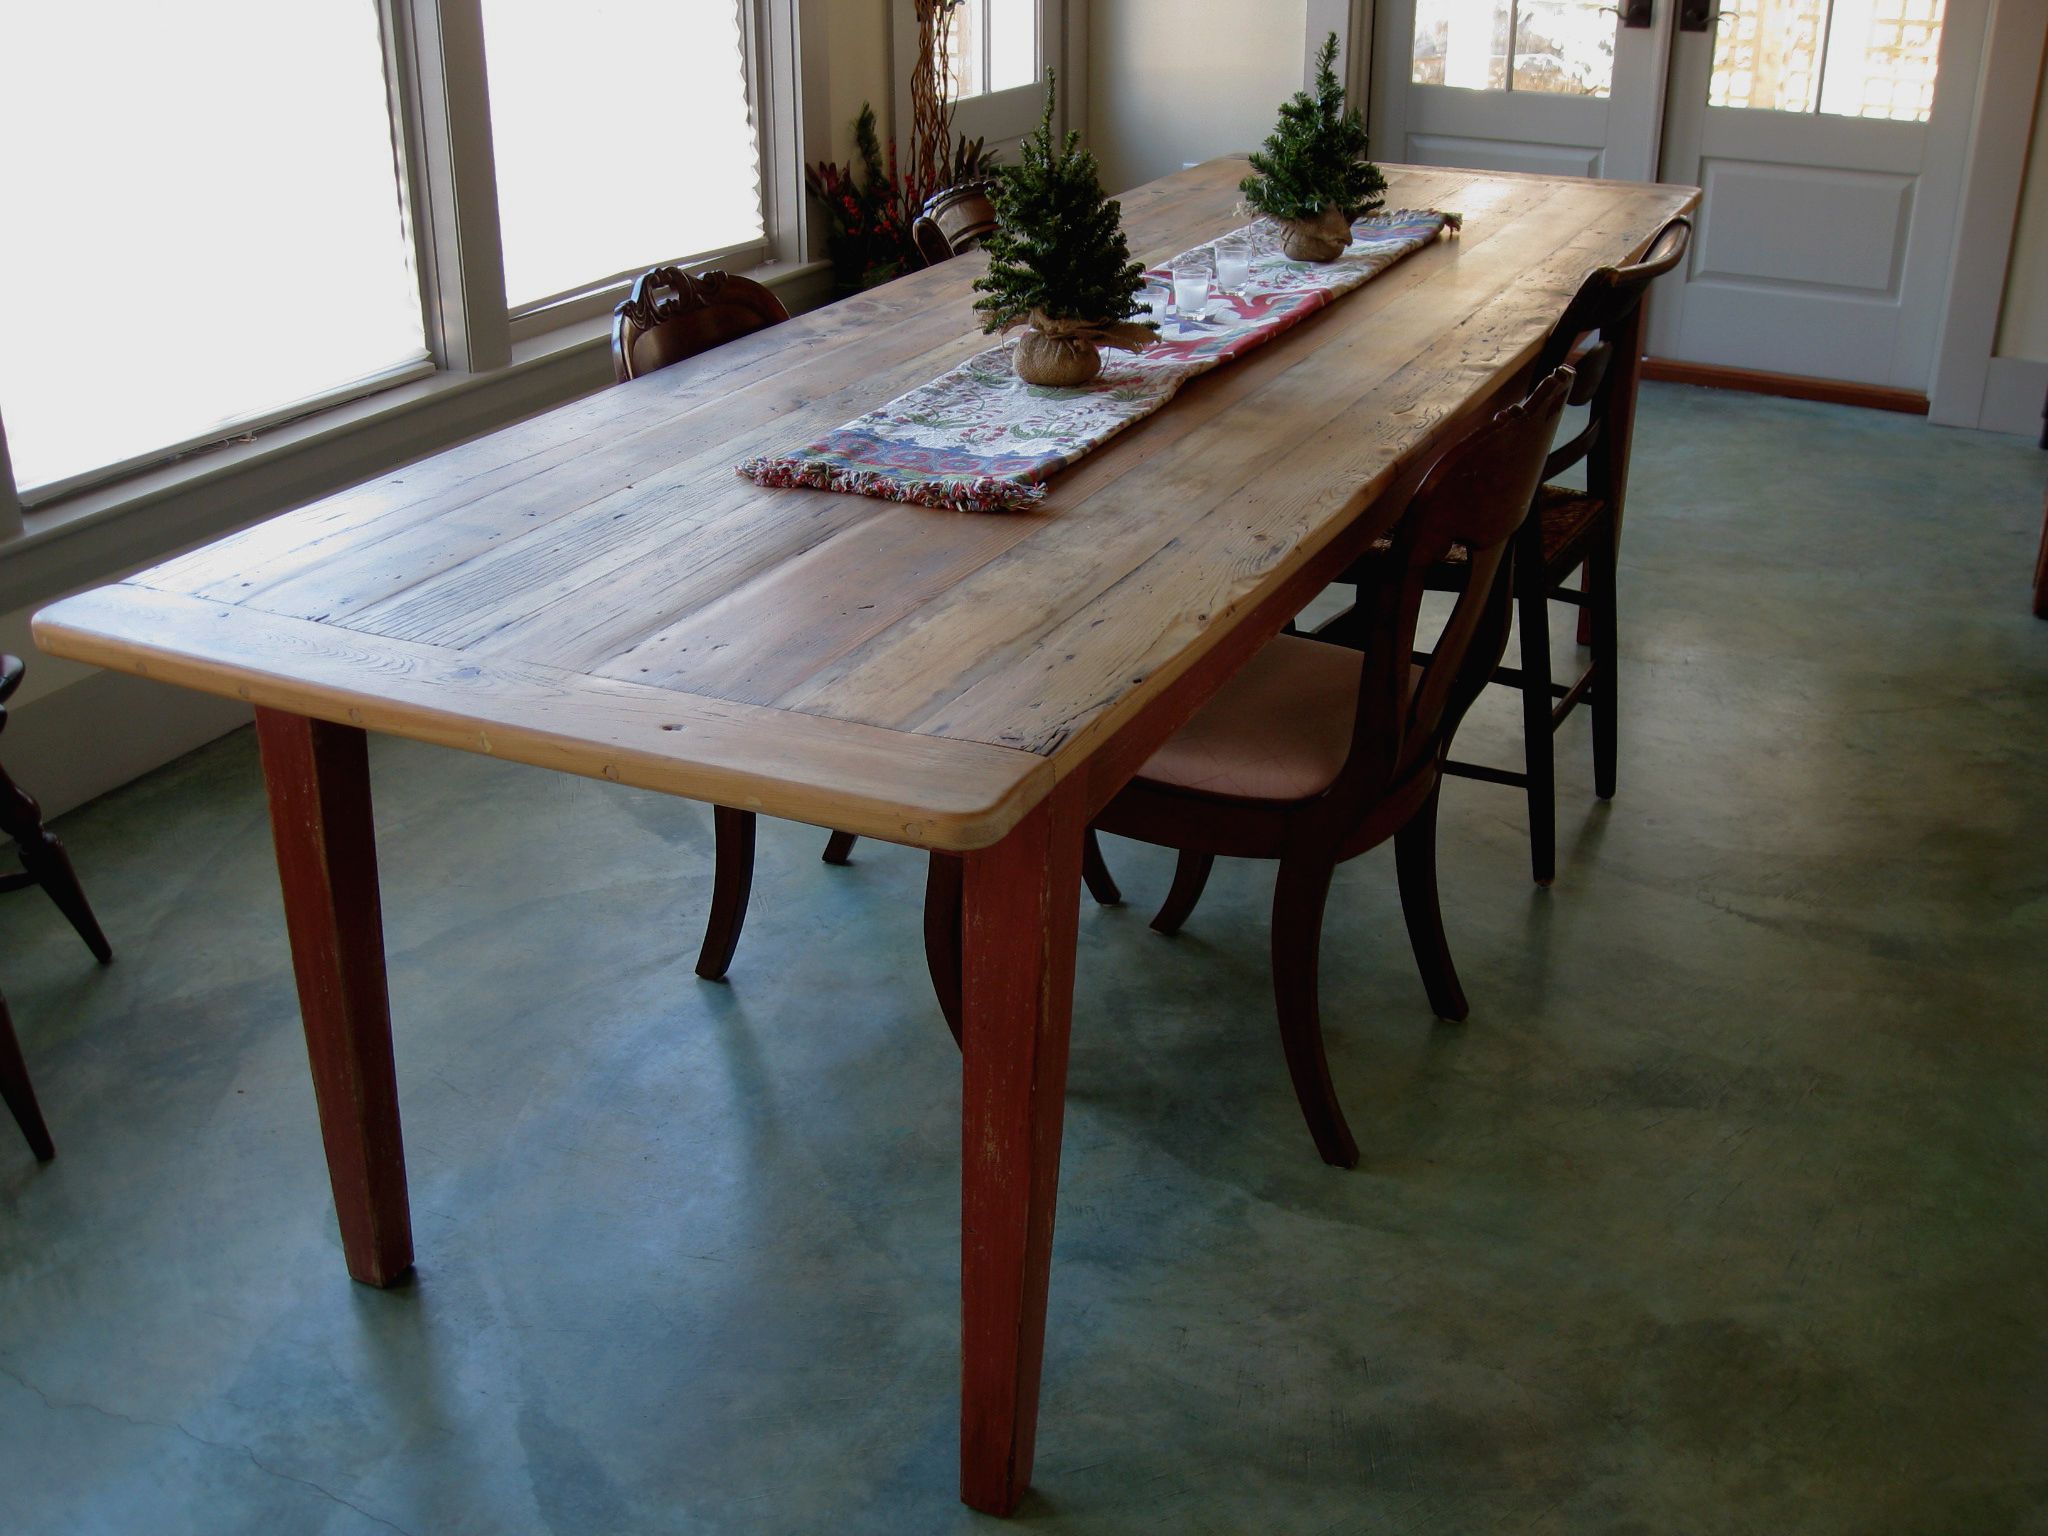 Rustic Honey Dining Tables Pertaining To 2019 Long Rustic Dining Table With Painted Base – Lake And (View 10 of 15)